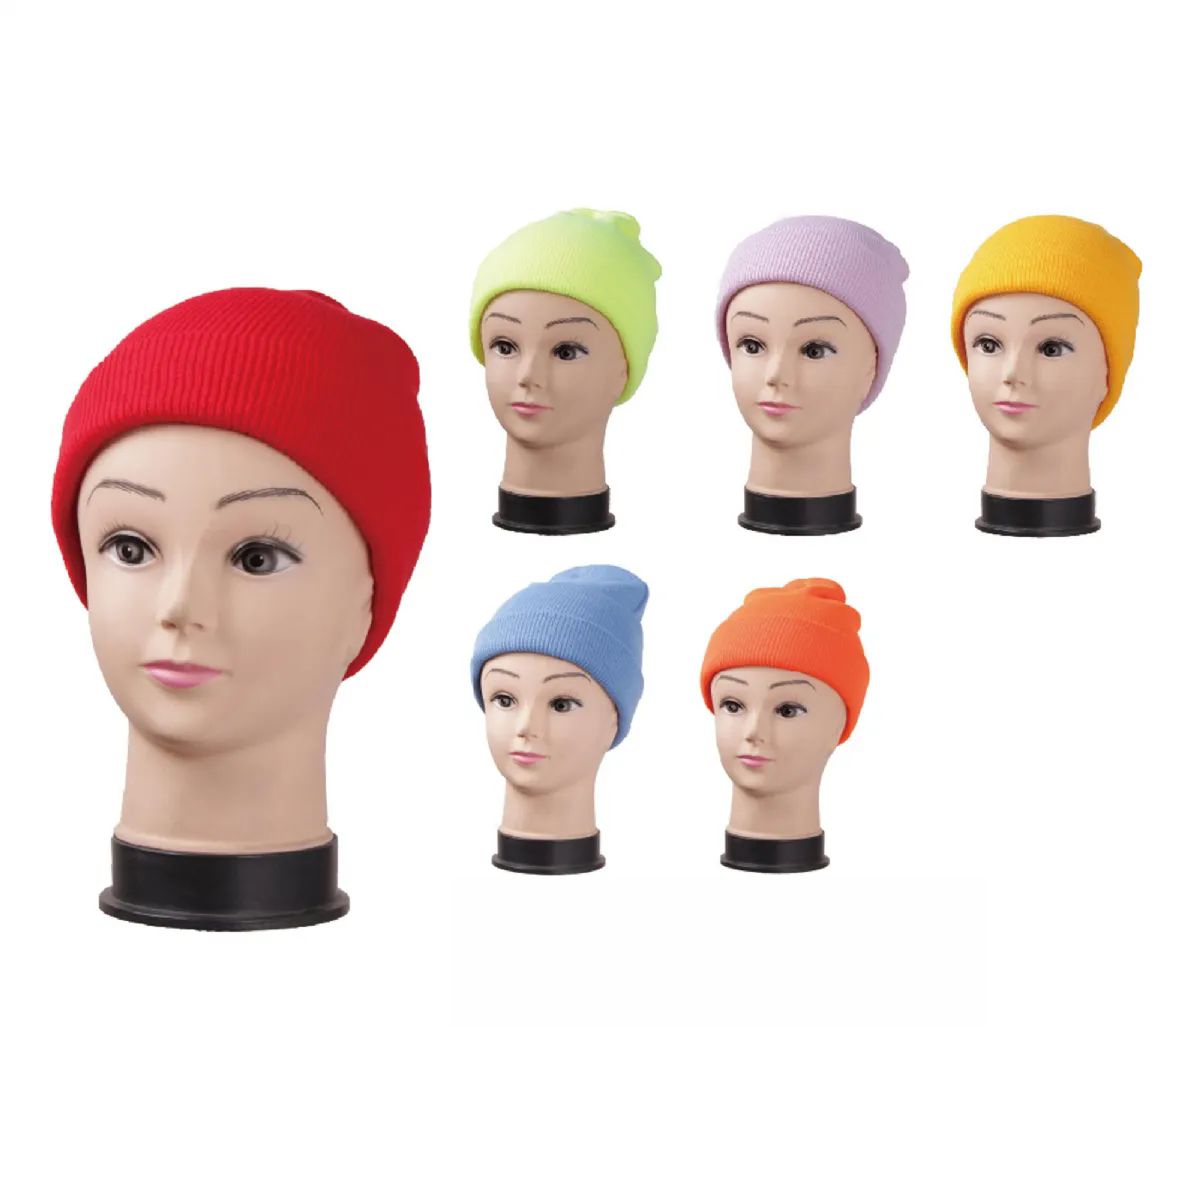 36 Pieces of Beanie Hat In Neon Color